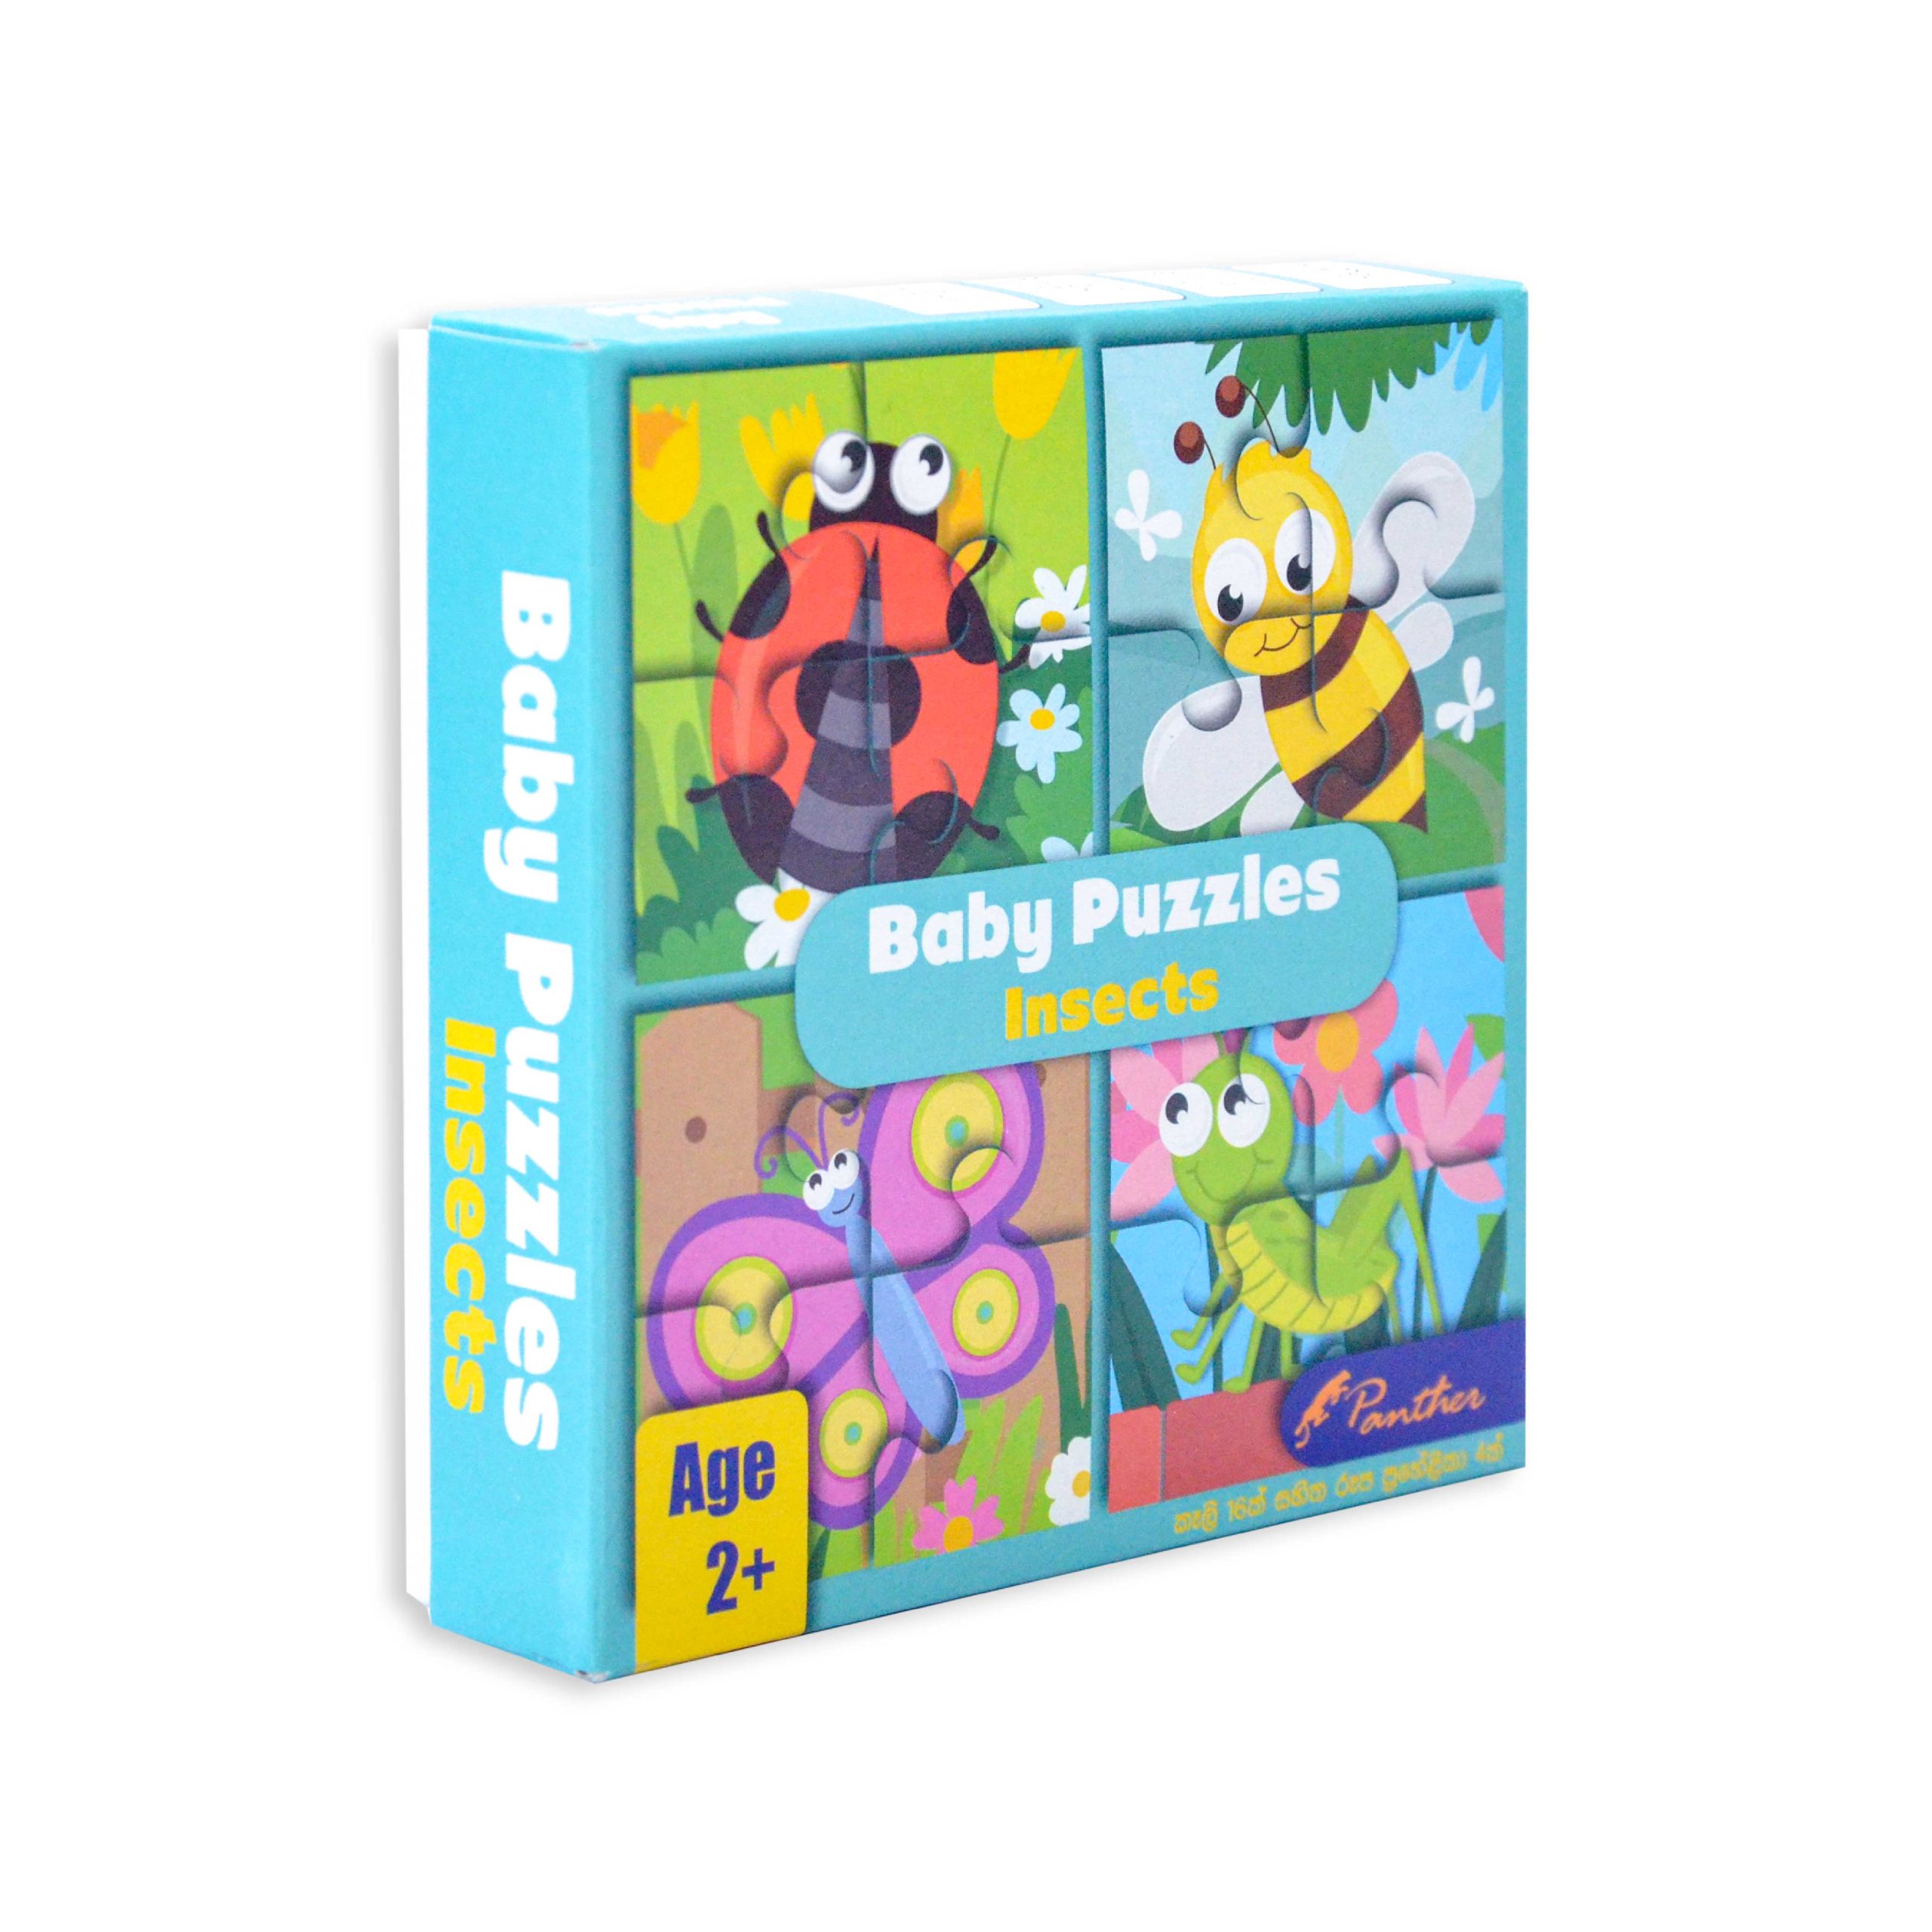 TY6002 BABY PUZZLES INSECTS 01 scaled